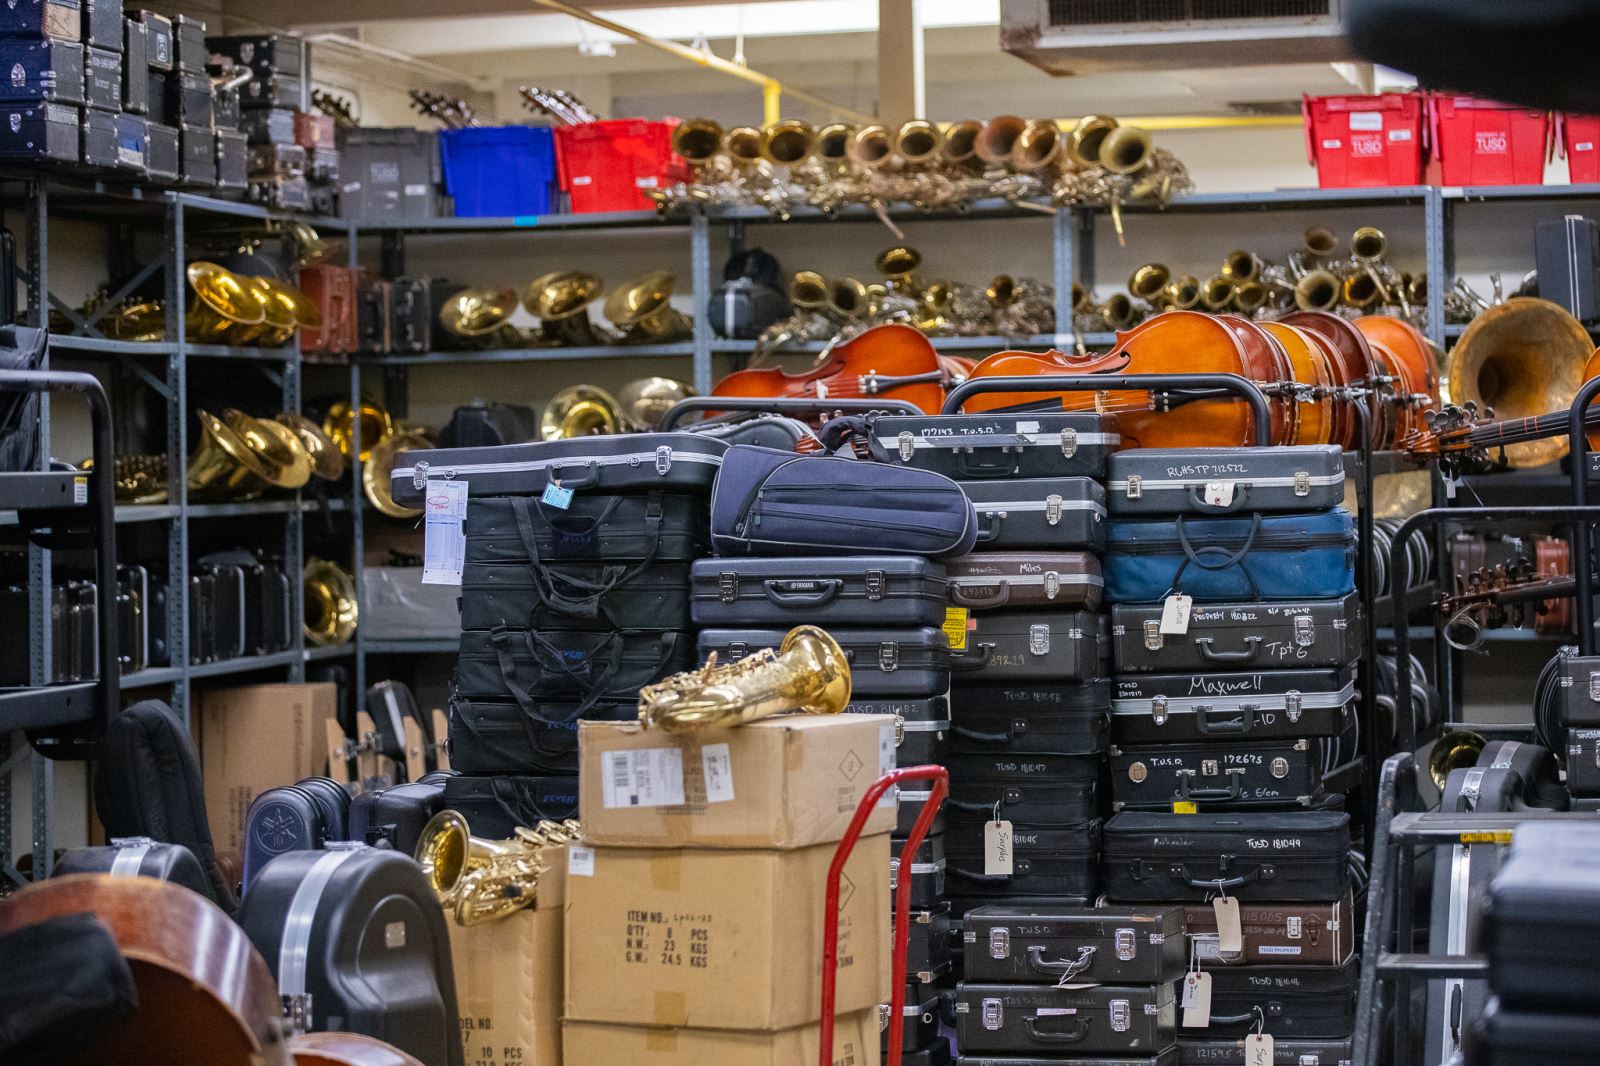 Instrument cases are stacked in front of shelves full of instruments.